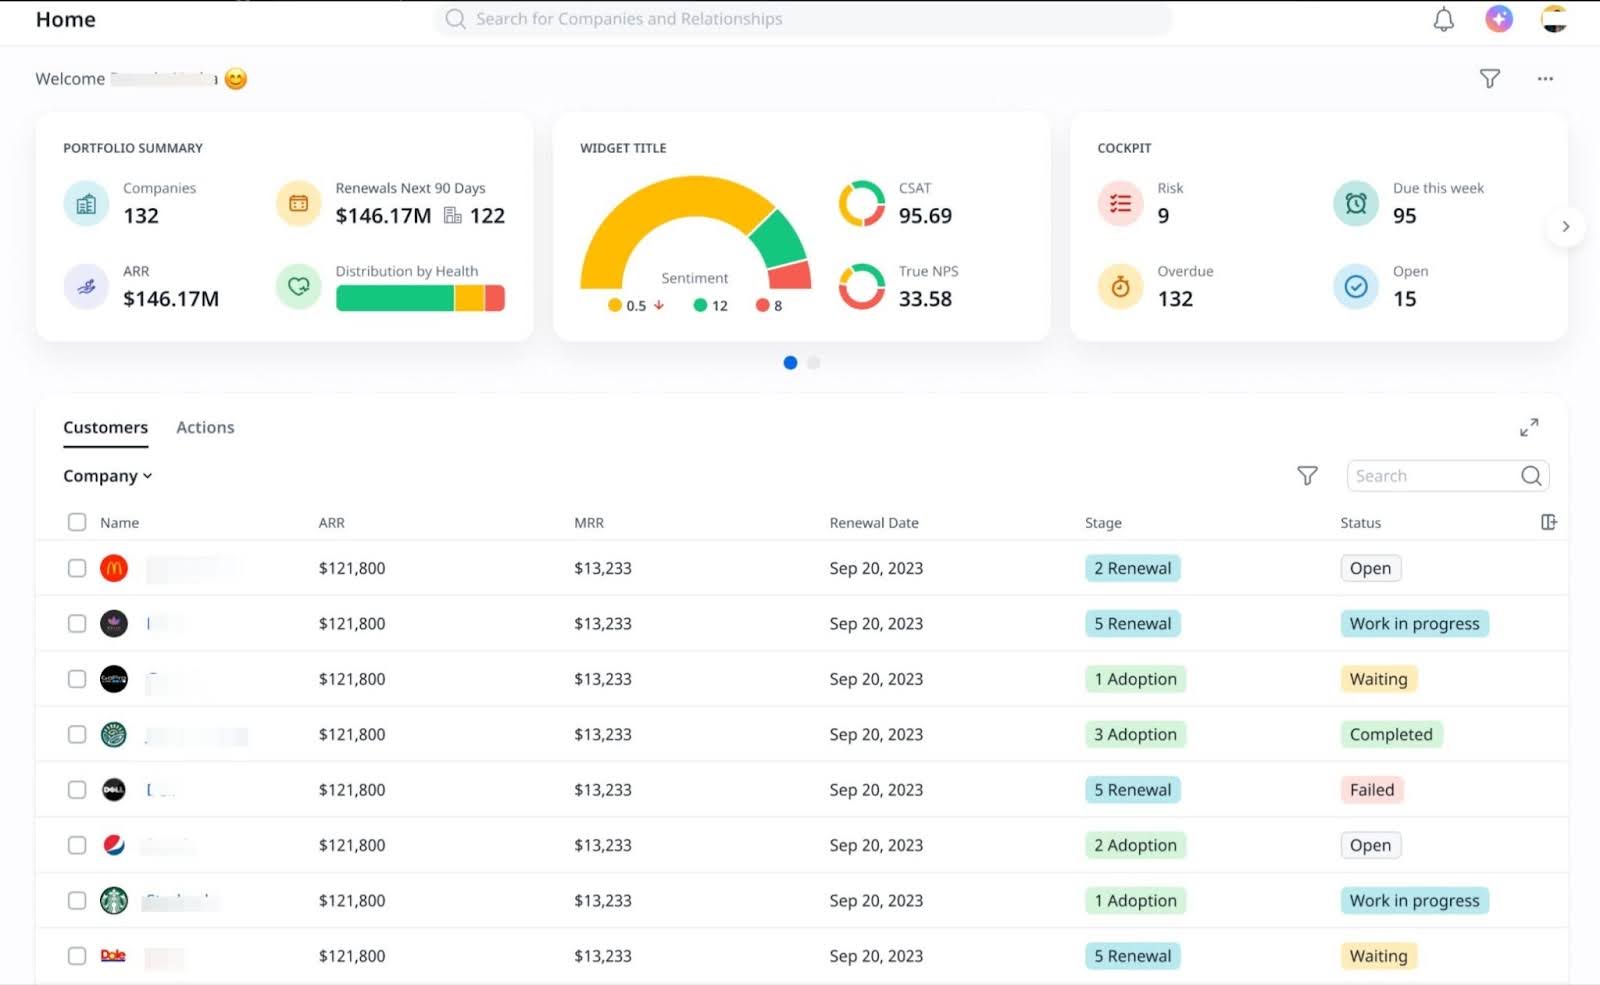 dashboard showing company portfolio summary, sentiment analysis, risk, overdue items, and a table of companies with ARR, MRR, renewal dates, and statuses.